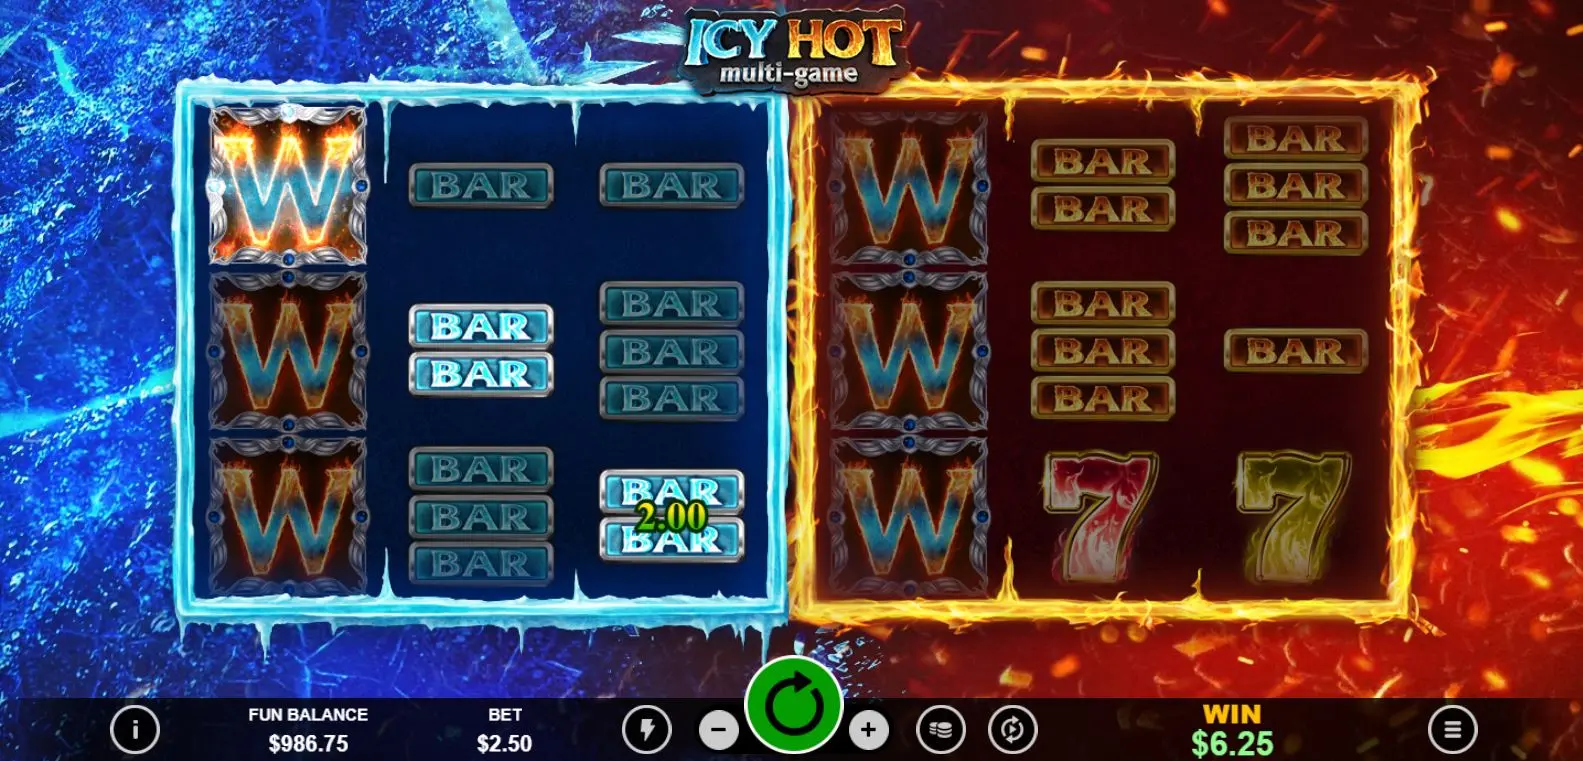 Icy Hot Multi-Game main features